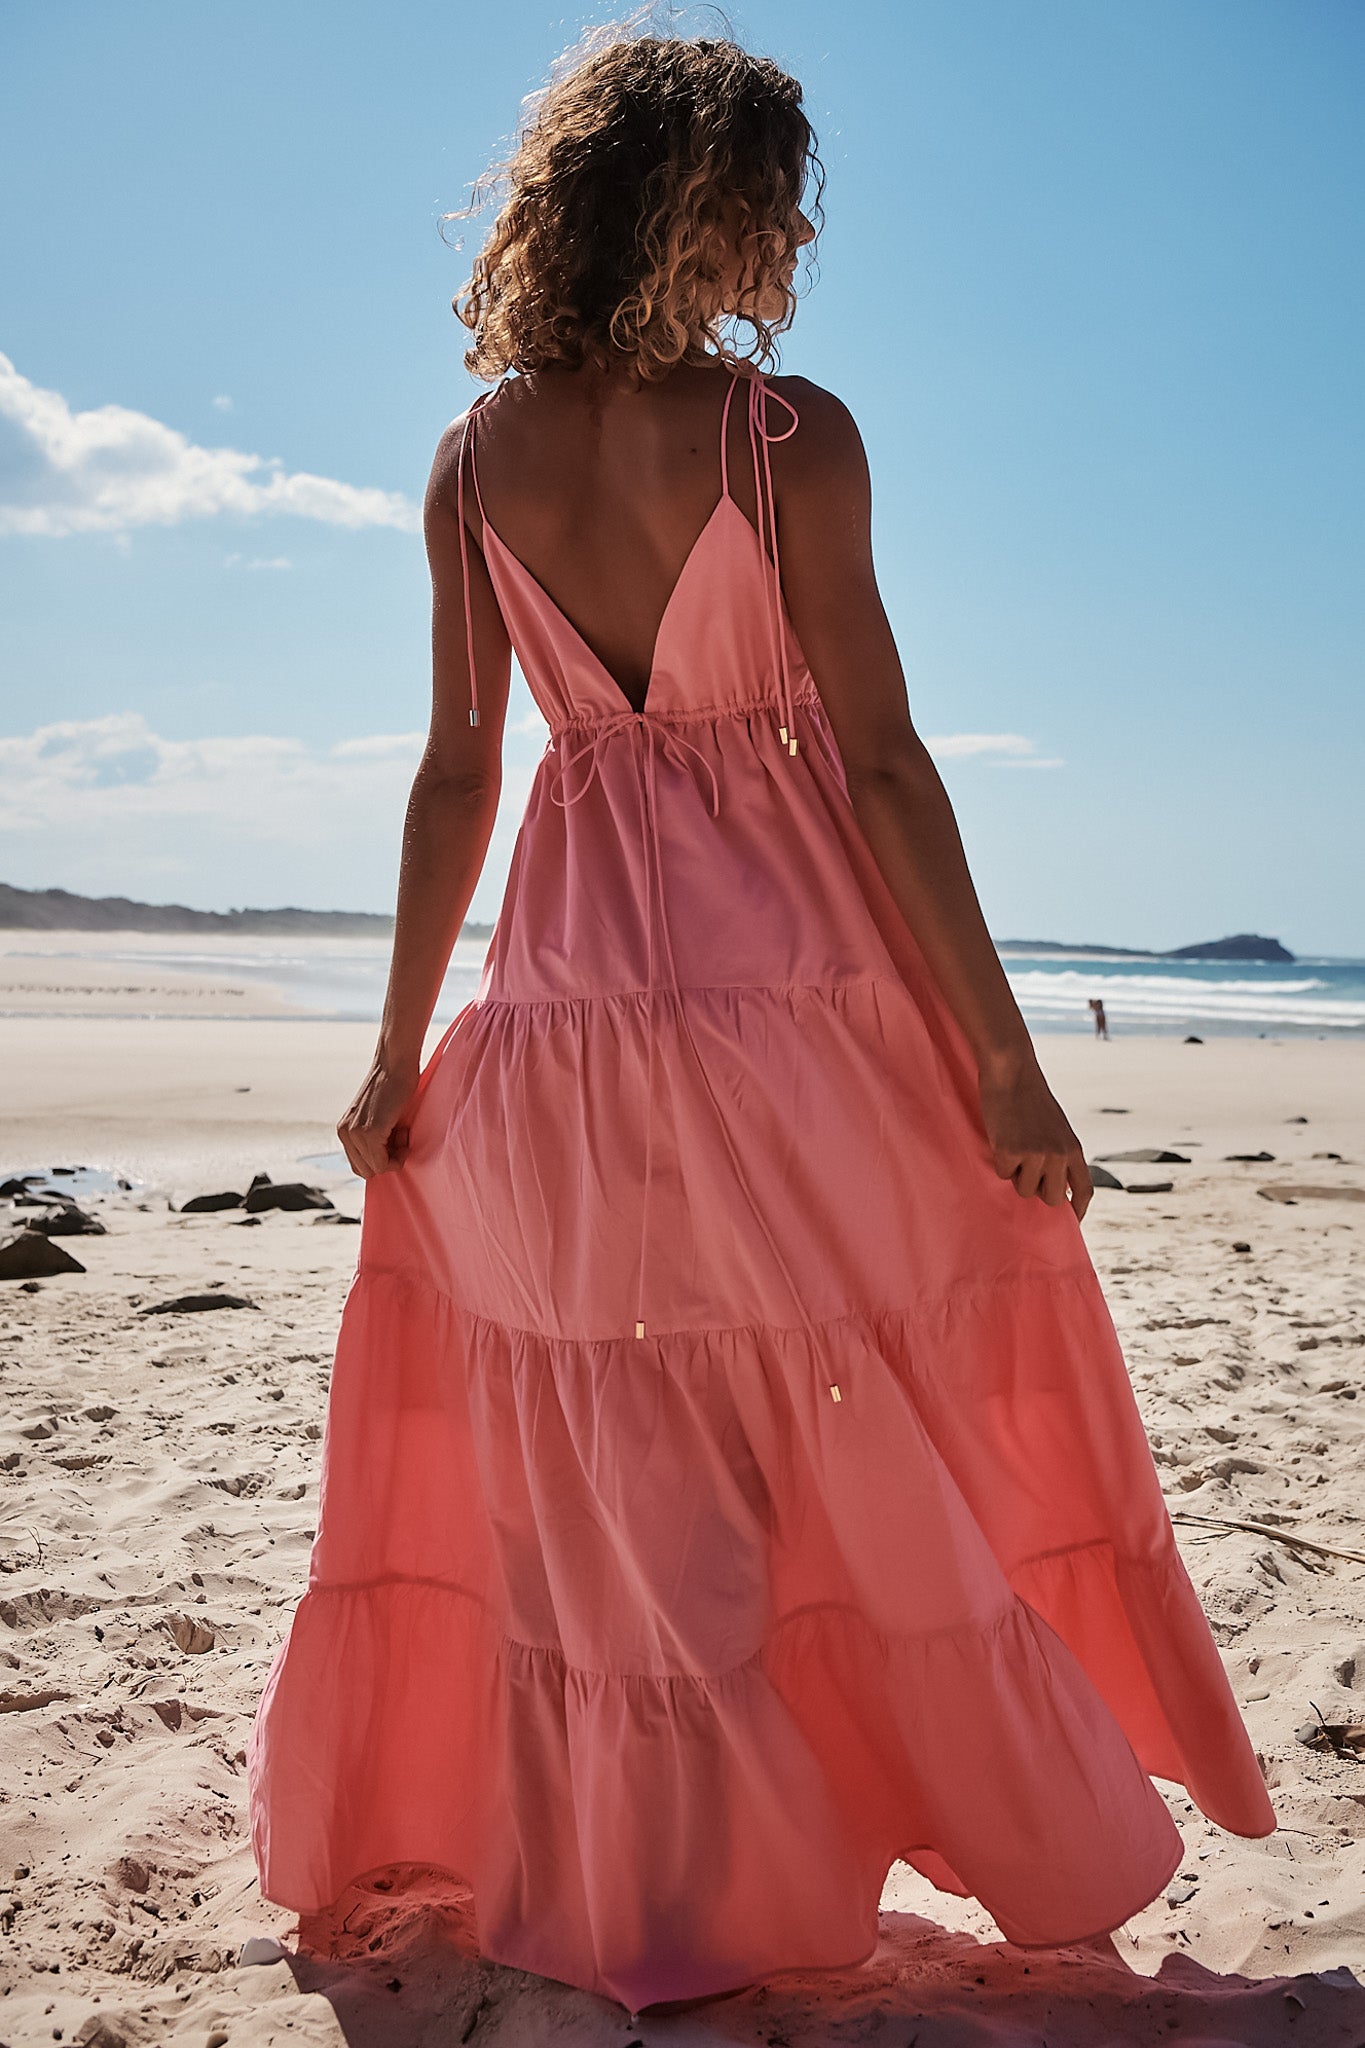 JAASE - Benita Maxi Dress: Adjustable Strap and Bust Cut Out Tiered Dress in Cotton Candy Pink